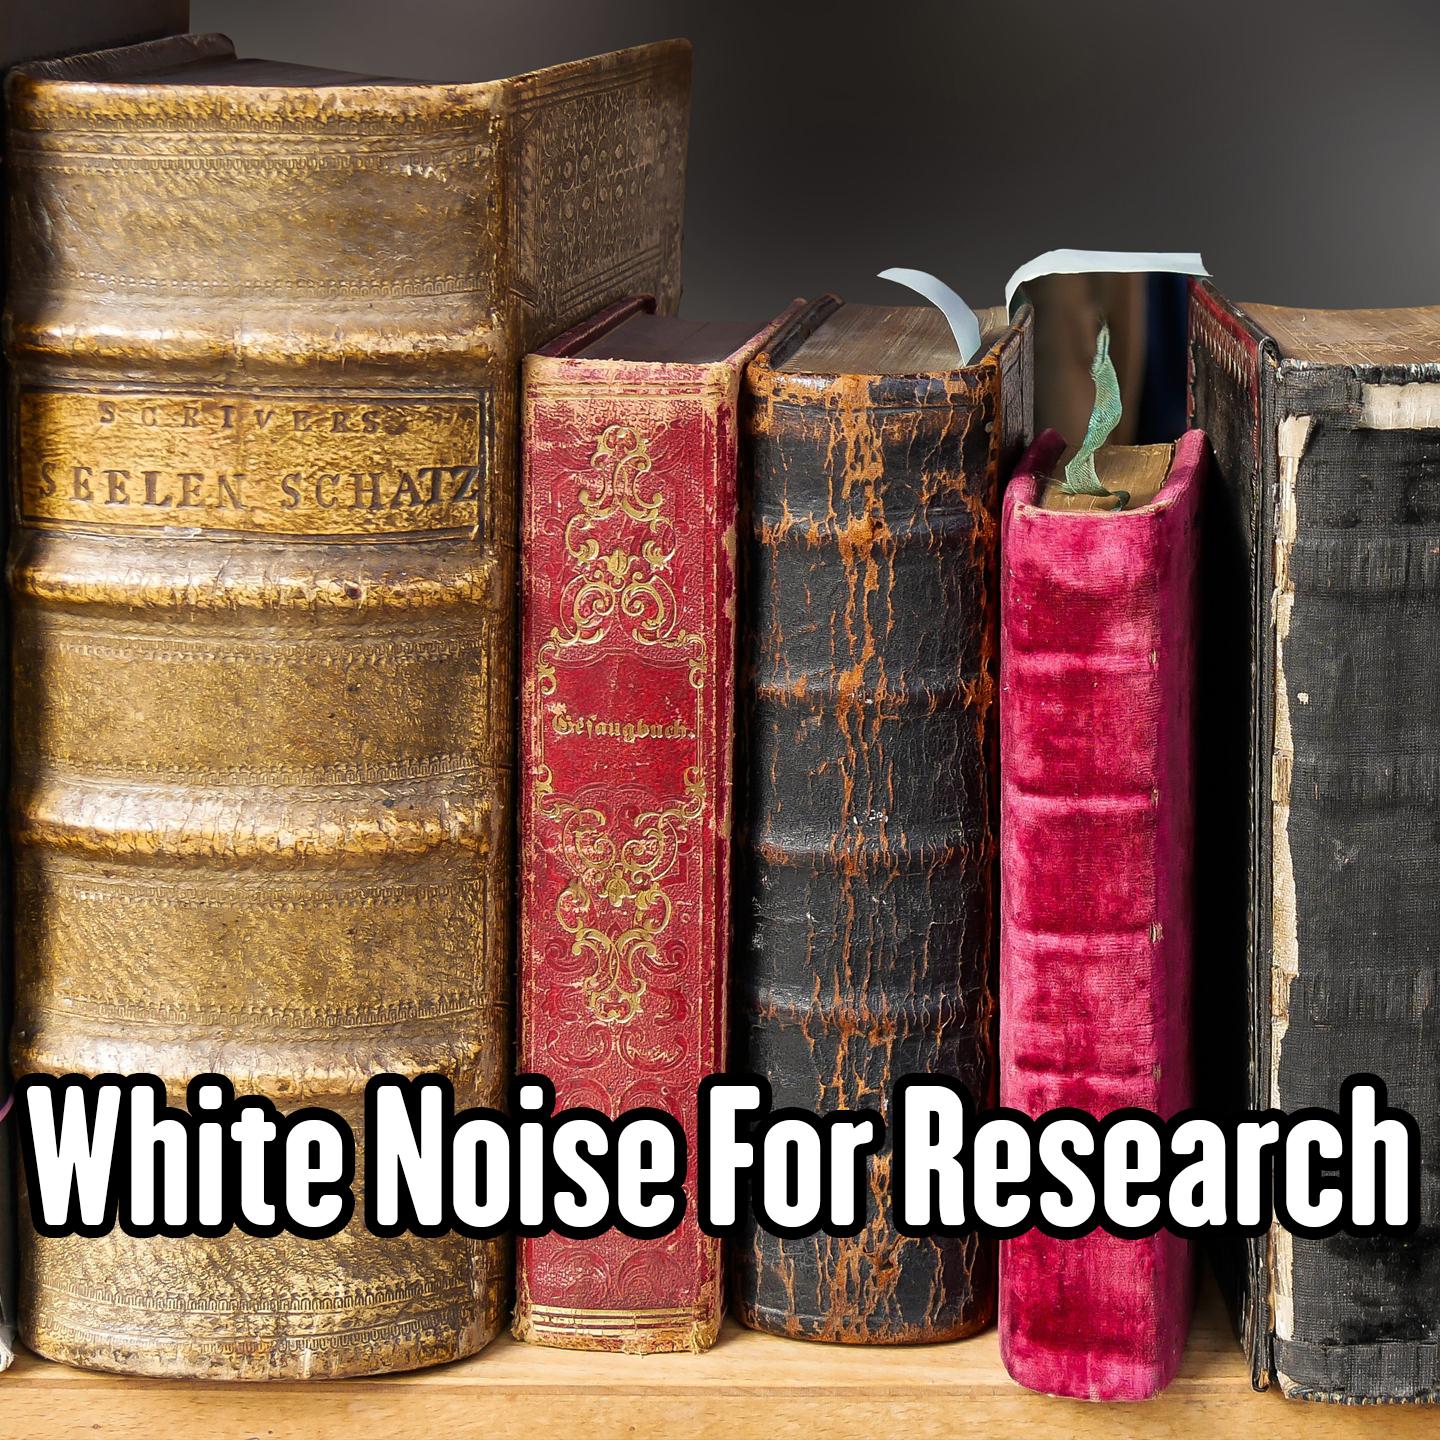 White Noise For Research